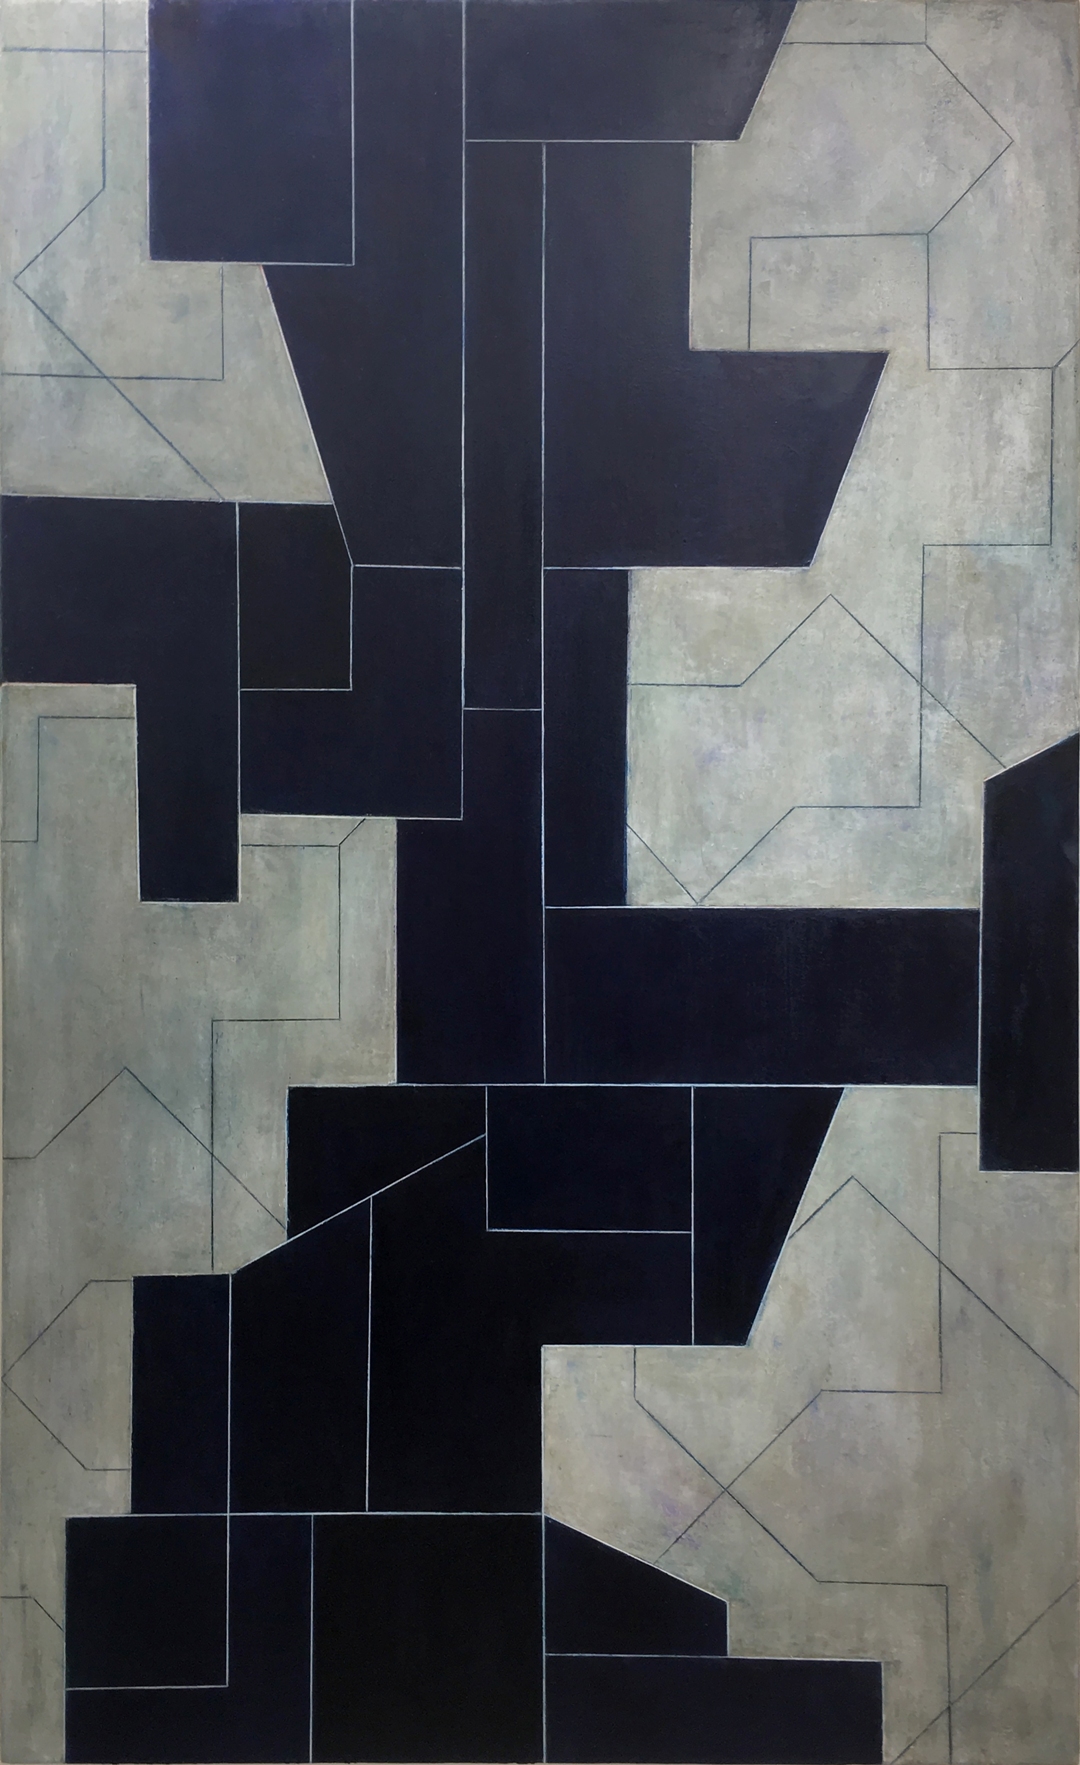 Captivating Geometric Abstract Art by Stephen Cimini